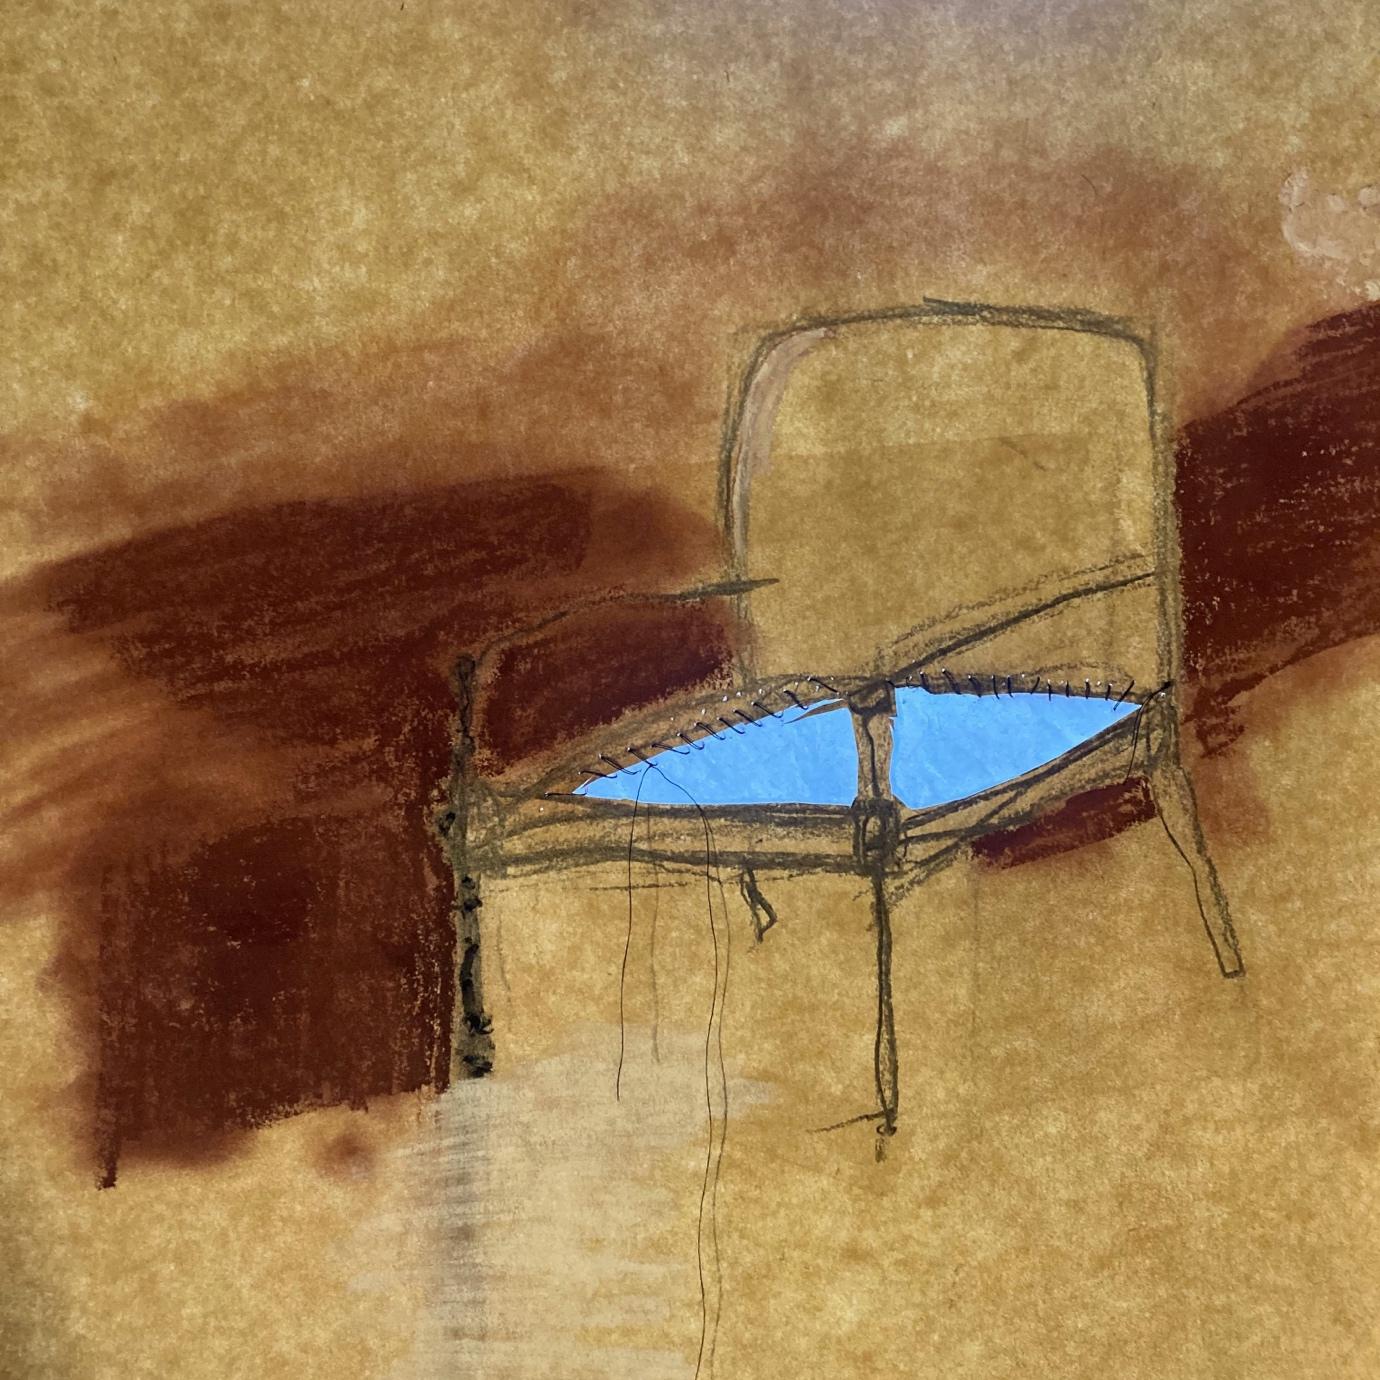 A drawing of a chair

Description automatically generated